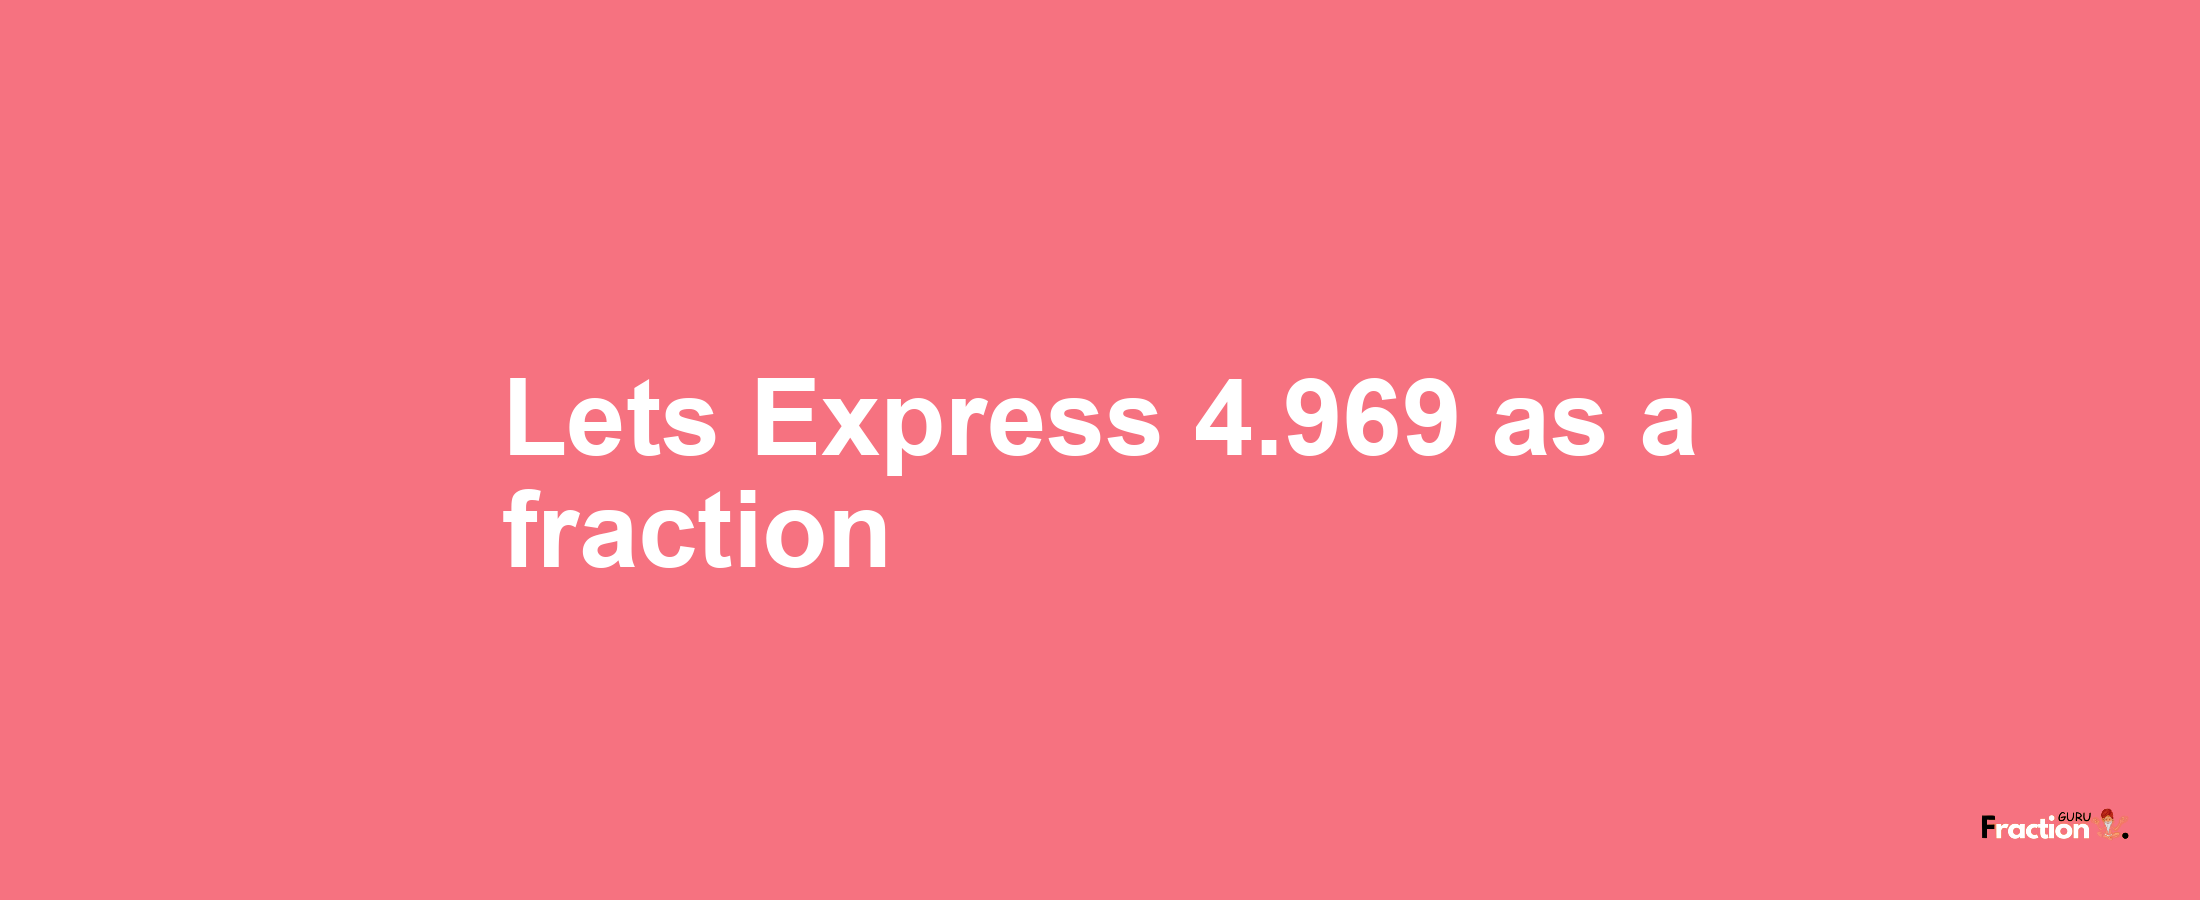 Lets Express 4.969 as afraction